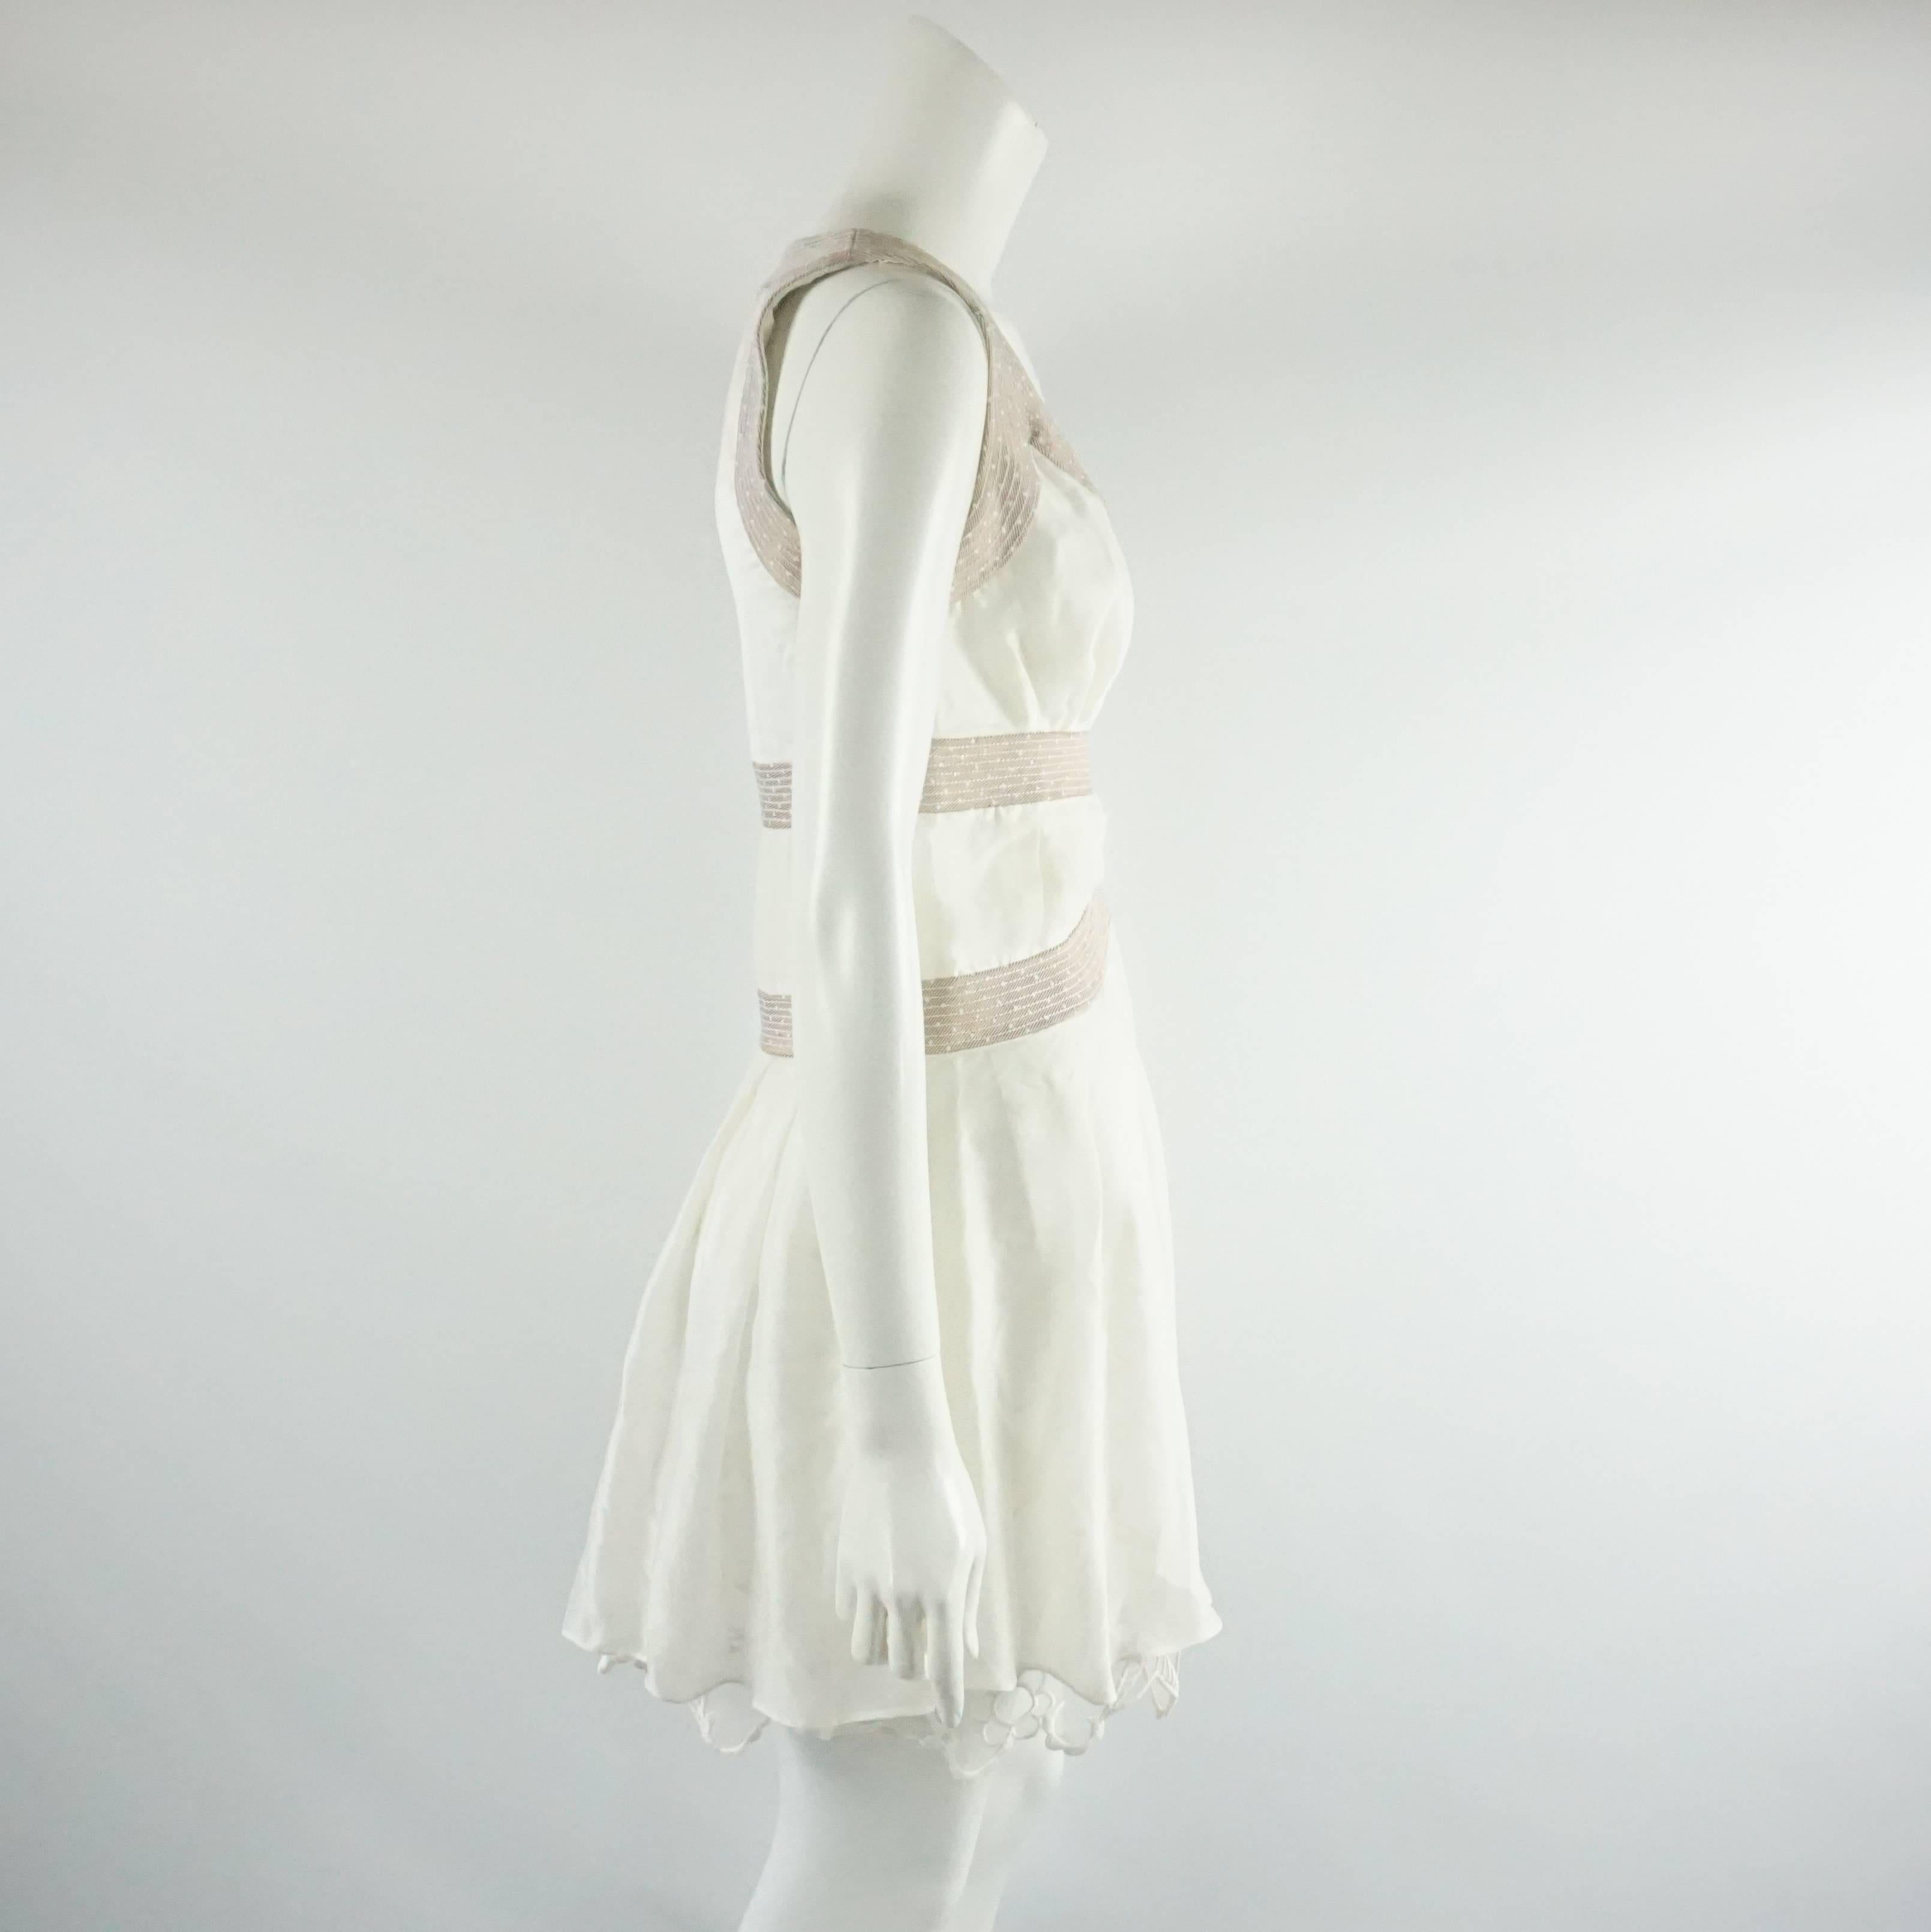 This Nina Ricci ivory dress has a thick lace underpinning with a sheer cotton overlay. The dress also has a copper metallic stitched design along the bodice, flowy style, and a side zipper. The dress is in very good vintage condition with light wear